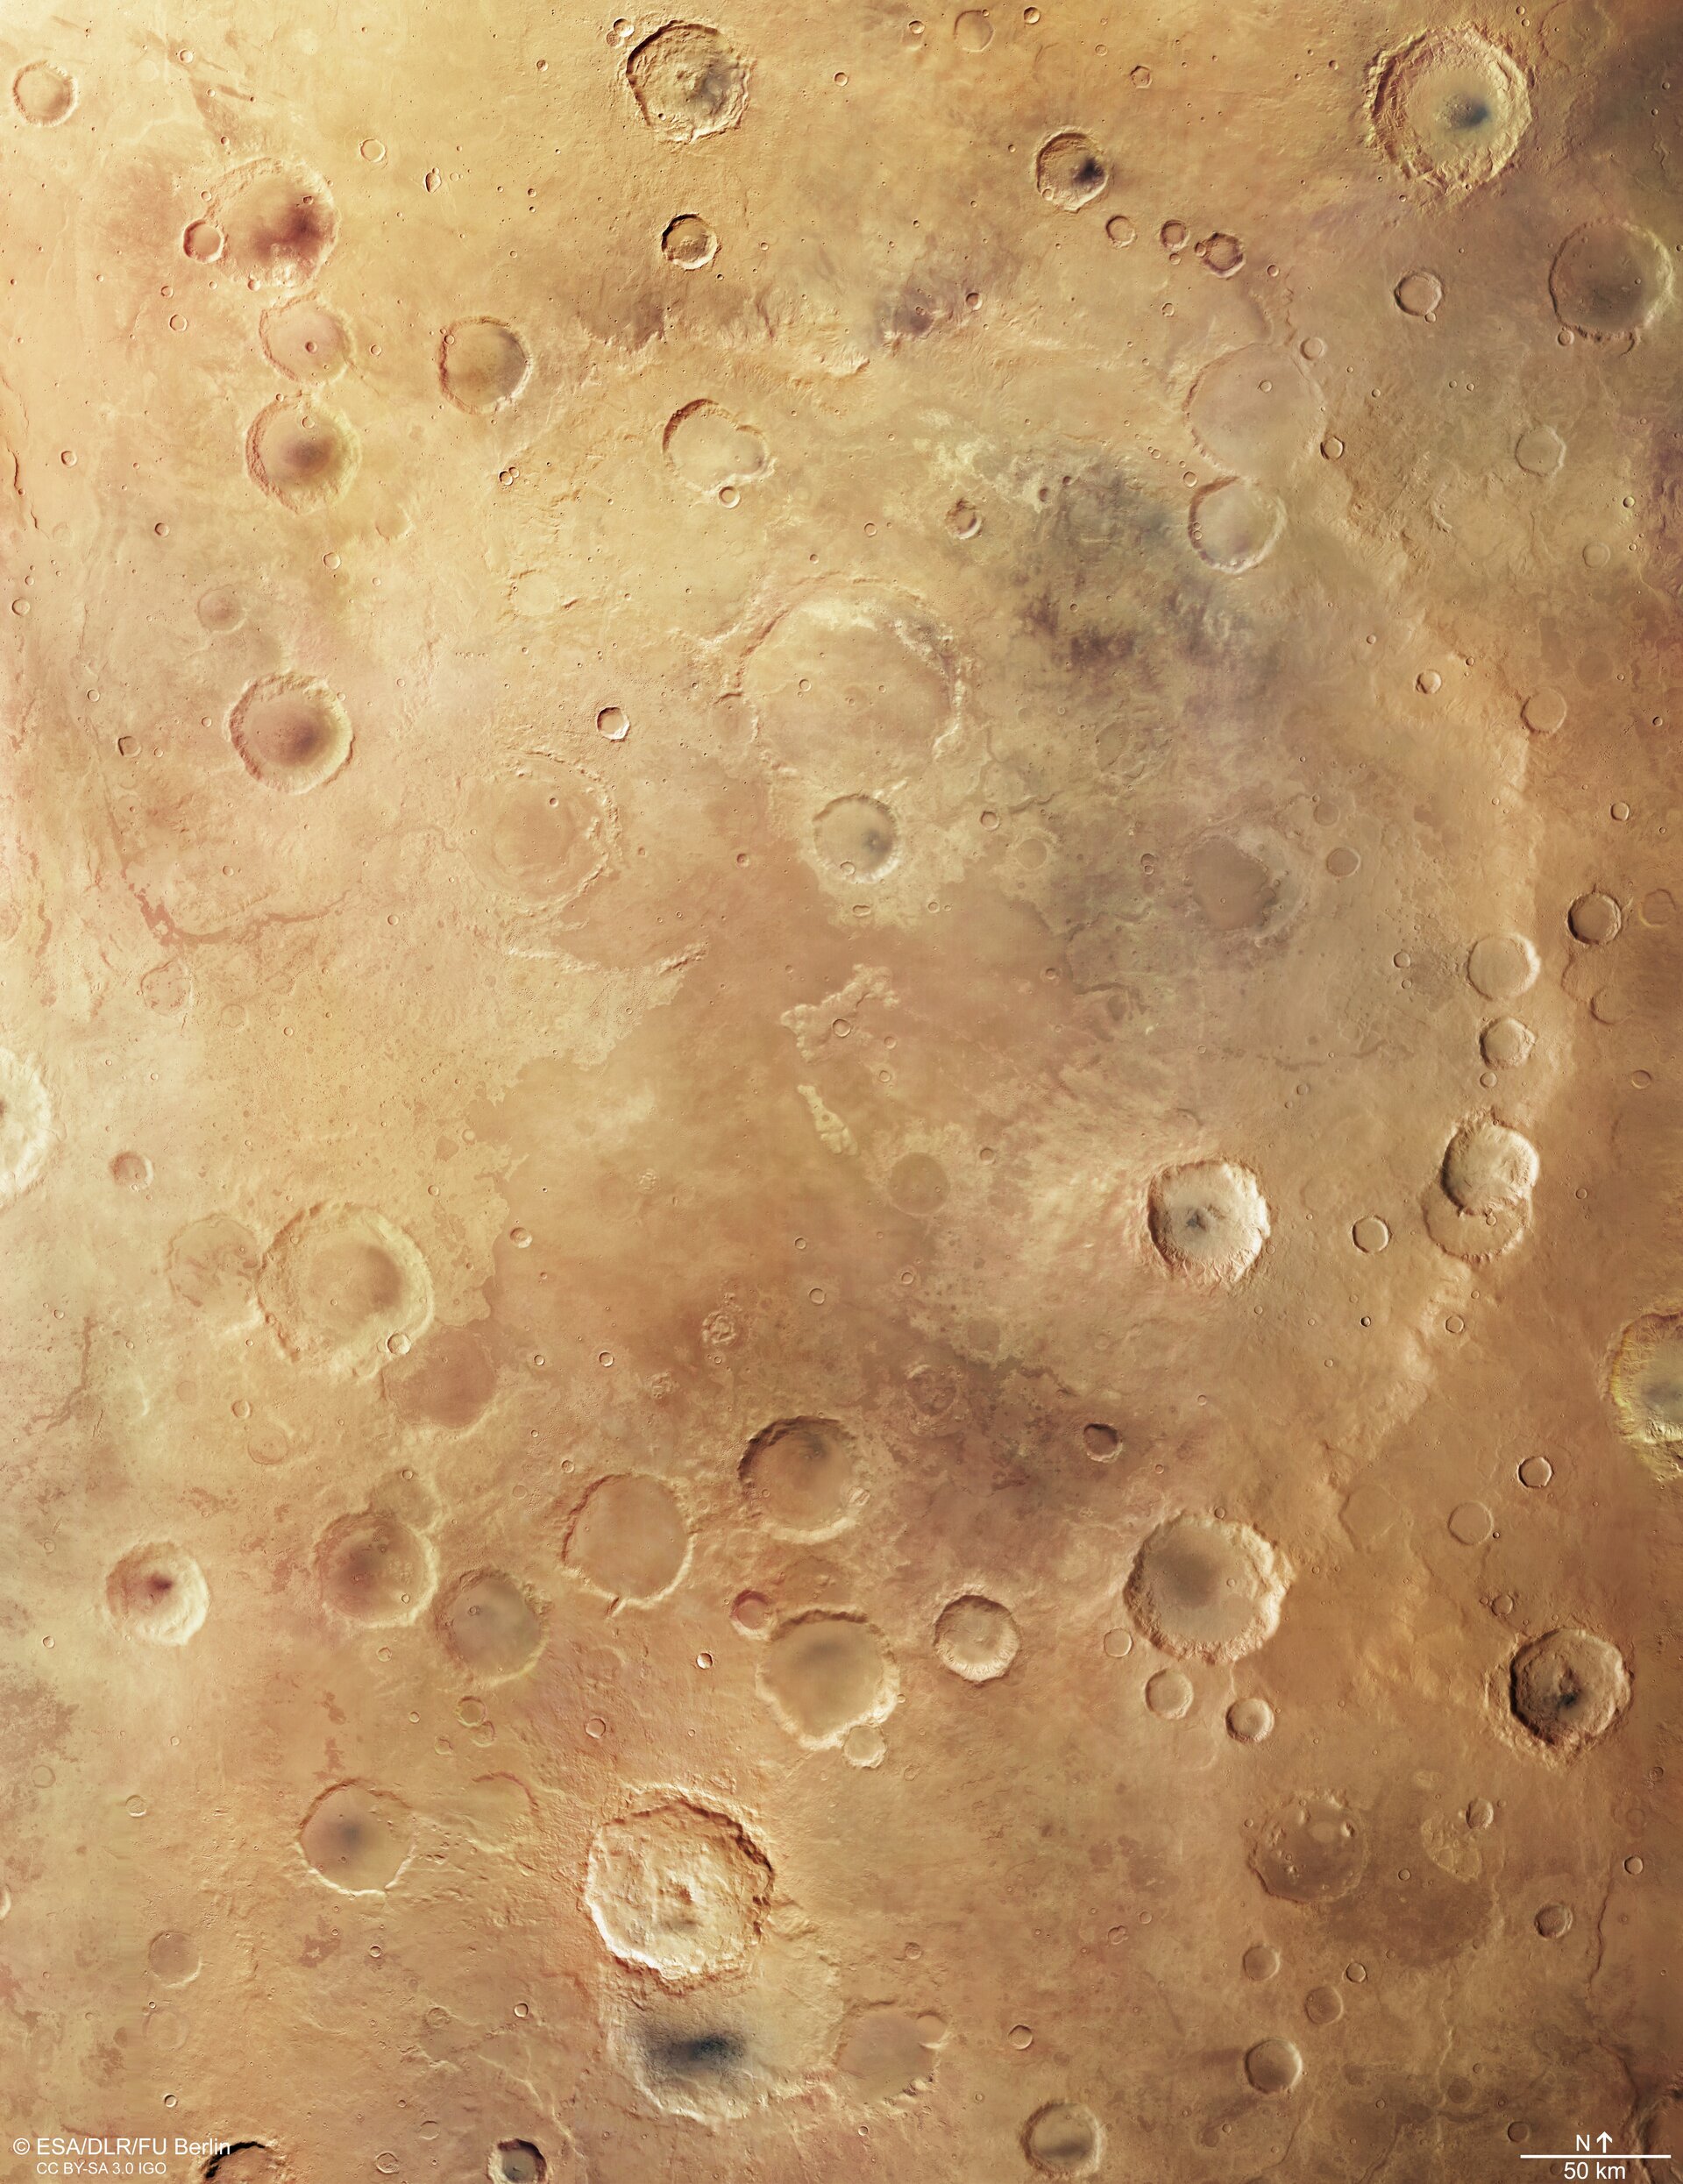 Mars Express plan view of Greeley Crater